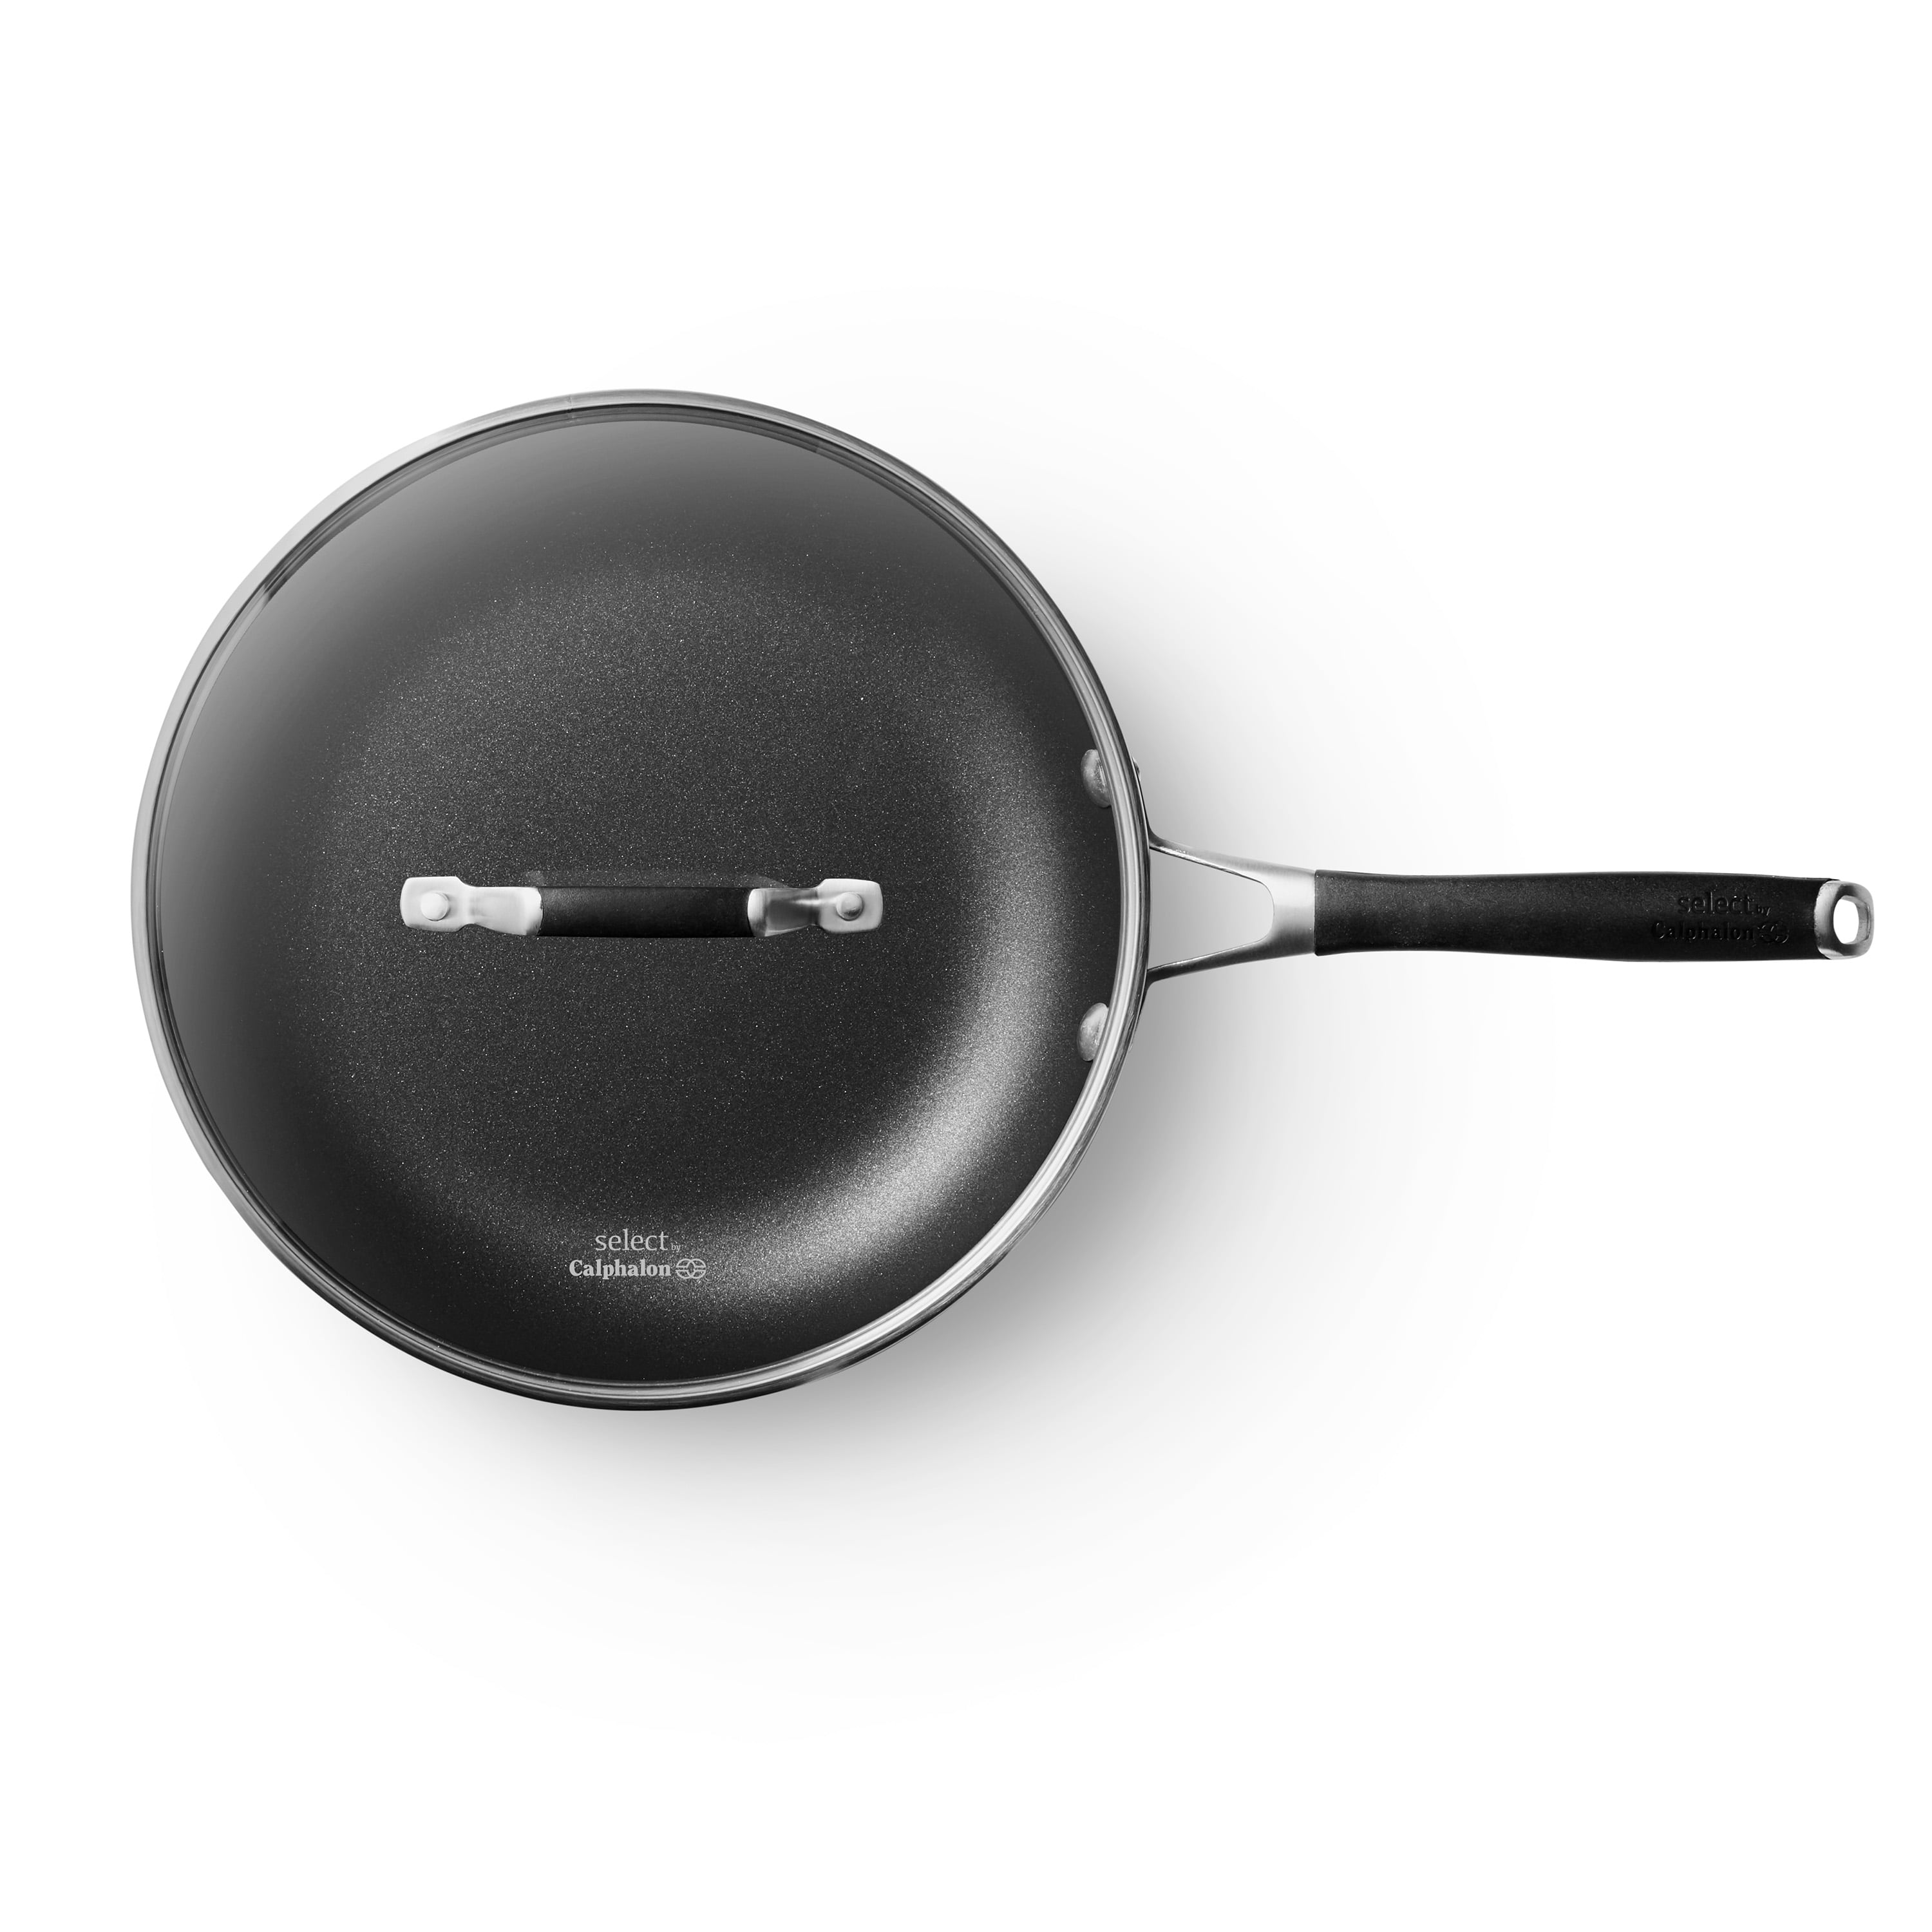 Select by Calphalon Hard-Anodized Nonstick 10-Inch Fry Pan with Cover 